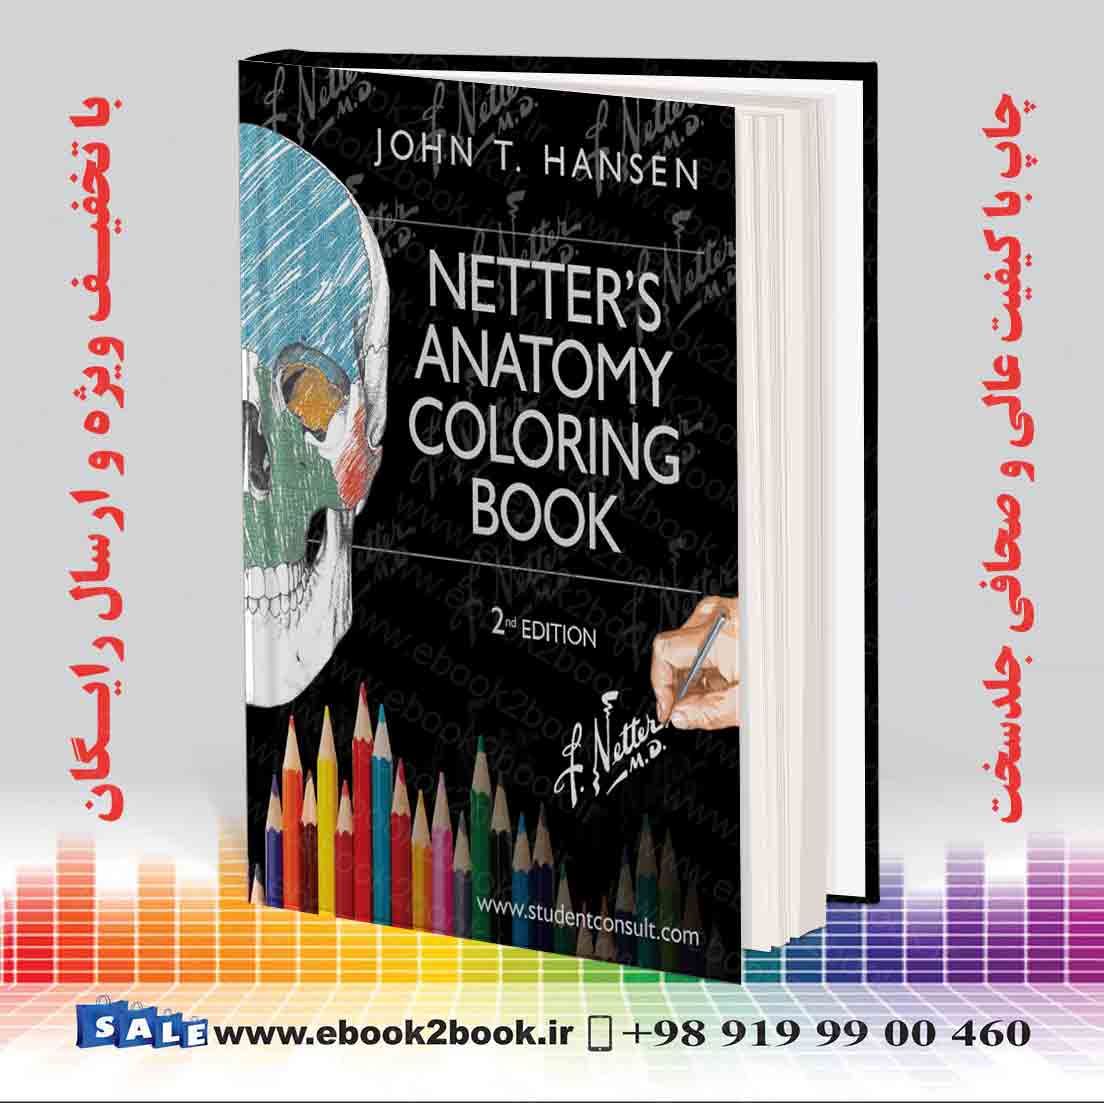 Download The Netter's Anatomy Coloring Book, 2th edition | فروشگاه ...